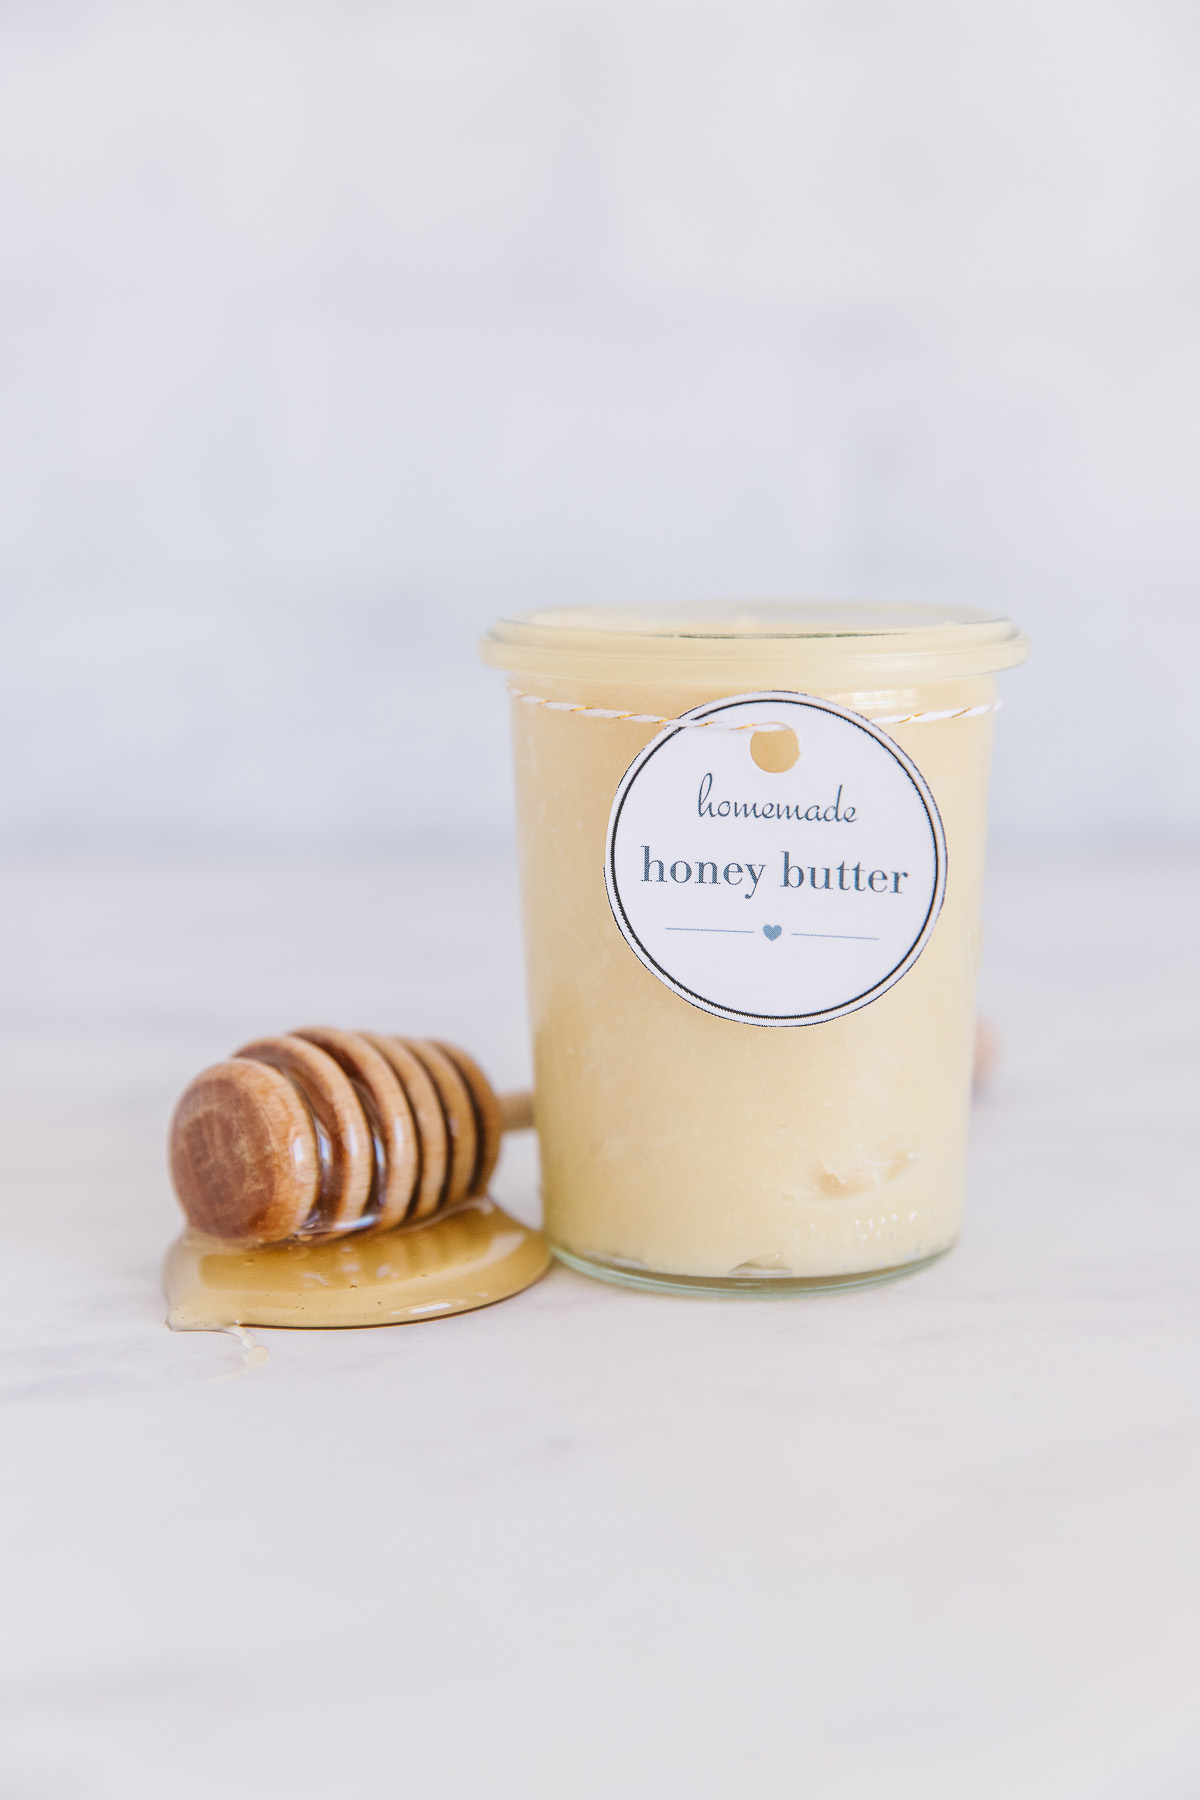 One container of homemade honey butter with label and a dollop of honey with a honey wand on the side.